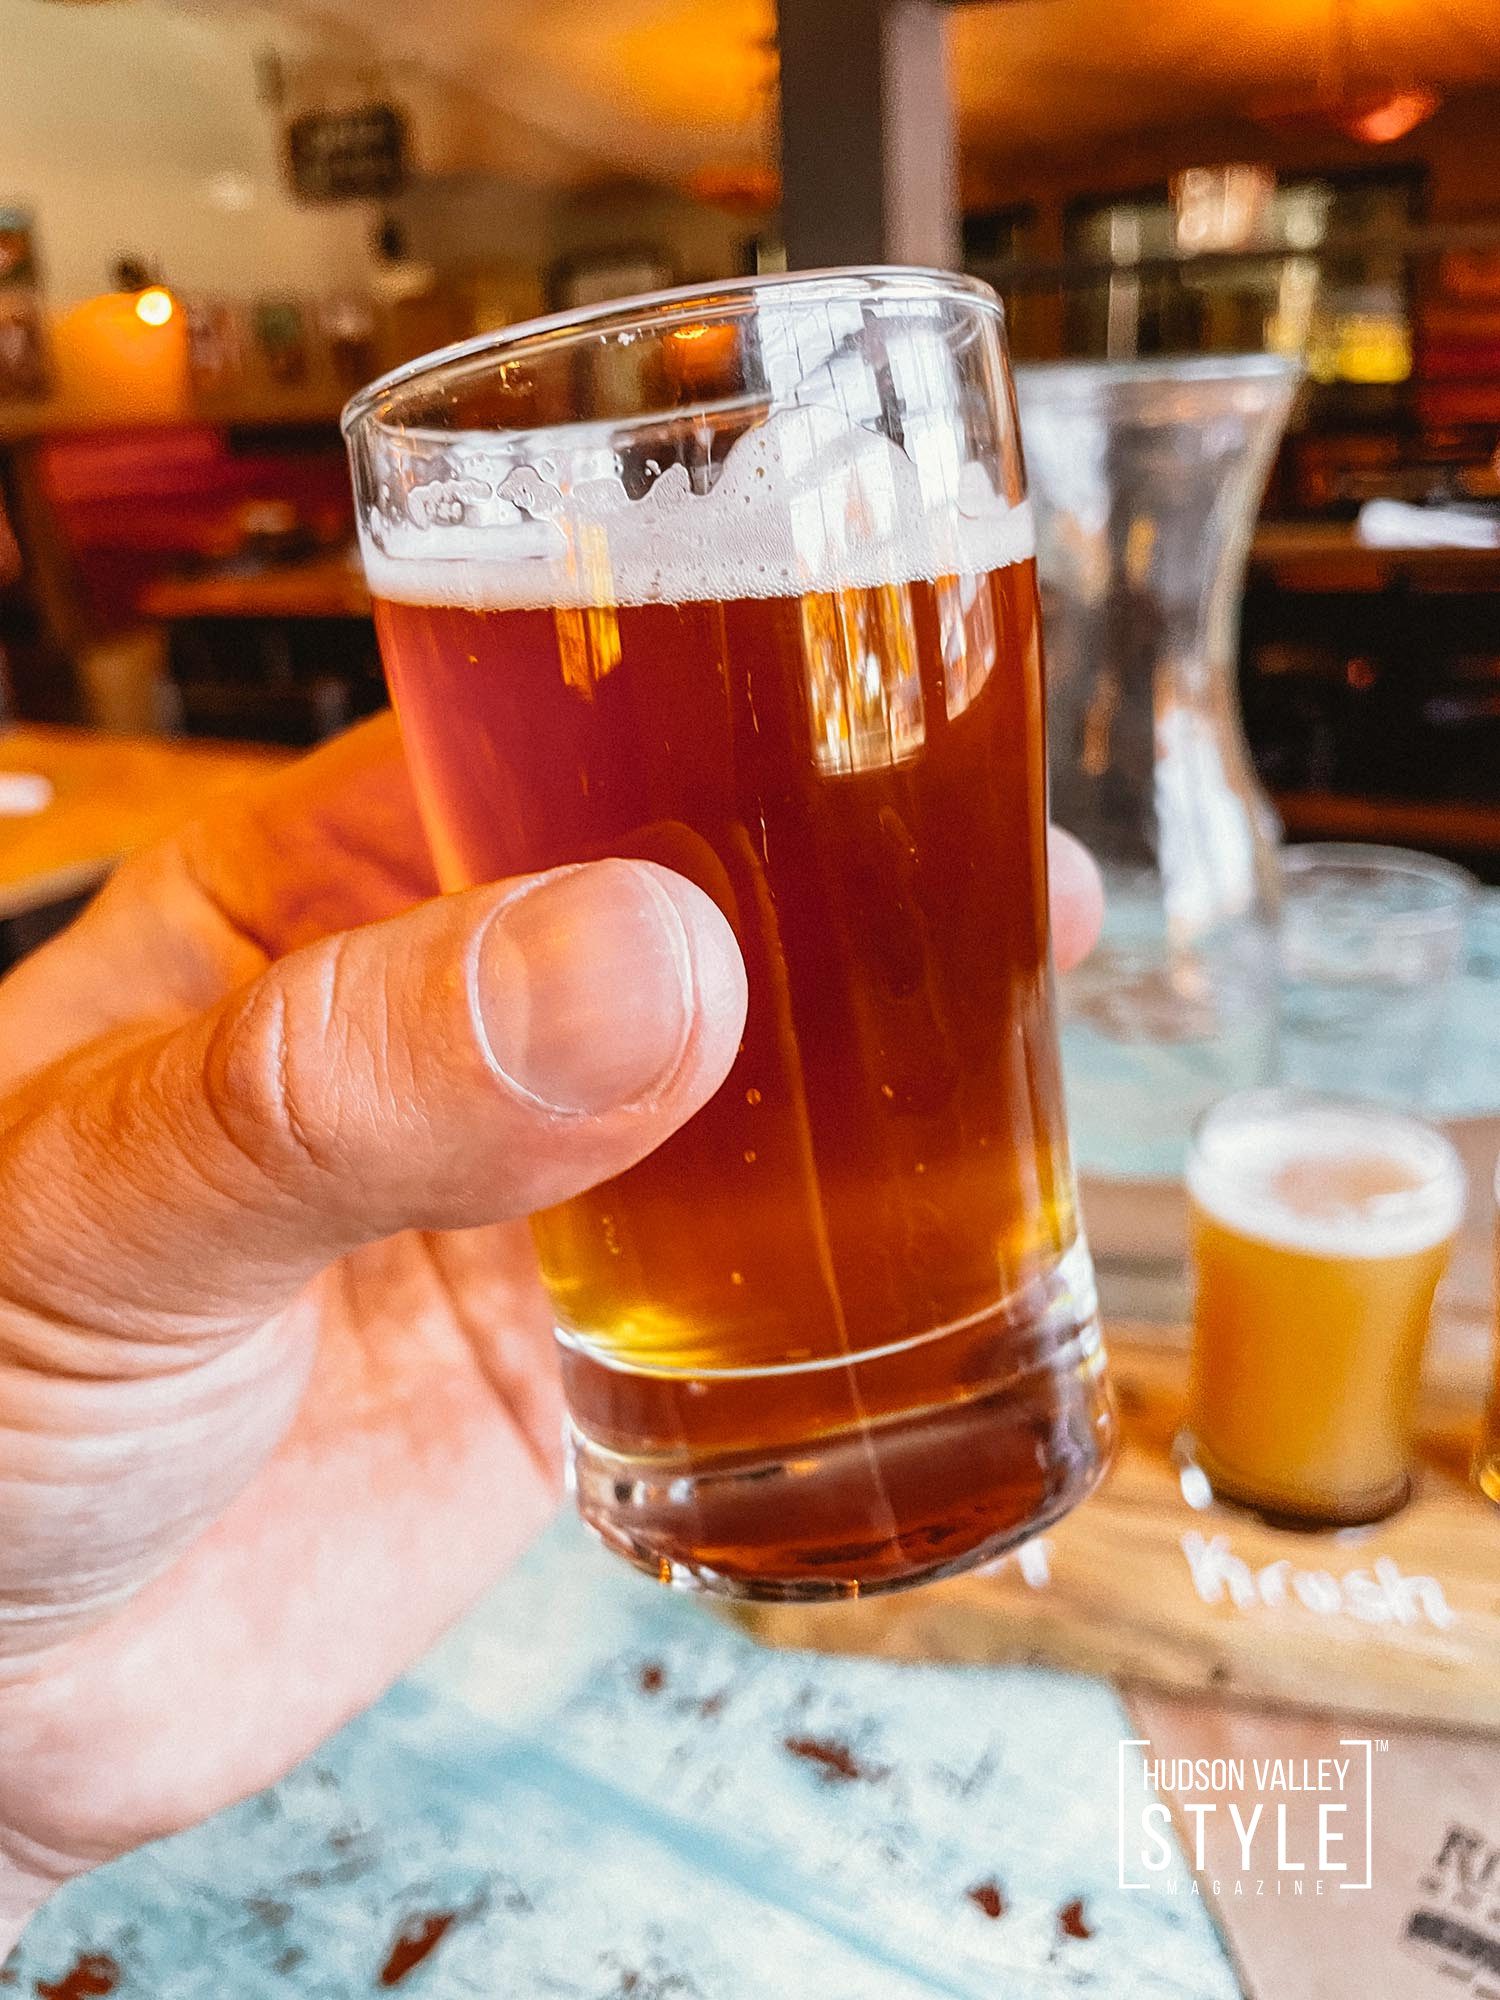 Experience the Best in Craft Beer and Delicious Food at Rip Van Winkle Restaurant and Brewery in Catskill, NY – Hudson Valley Style Magazine's Restaurant Reviews with Maxwell Alexander